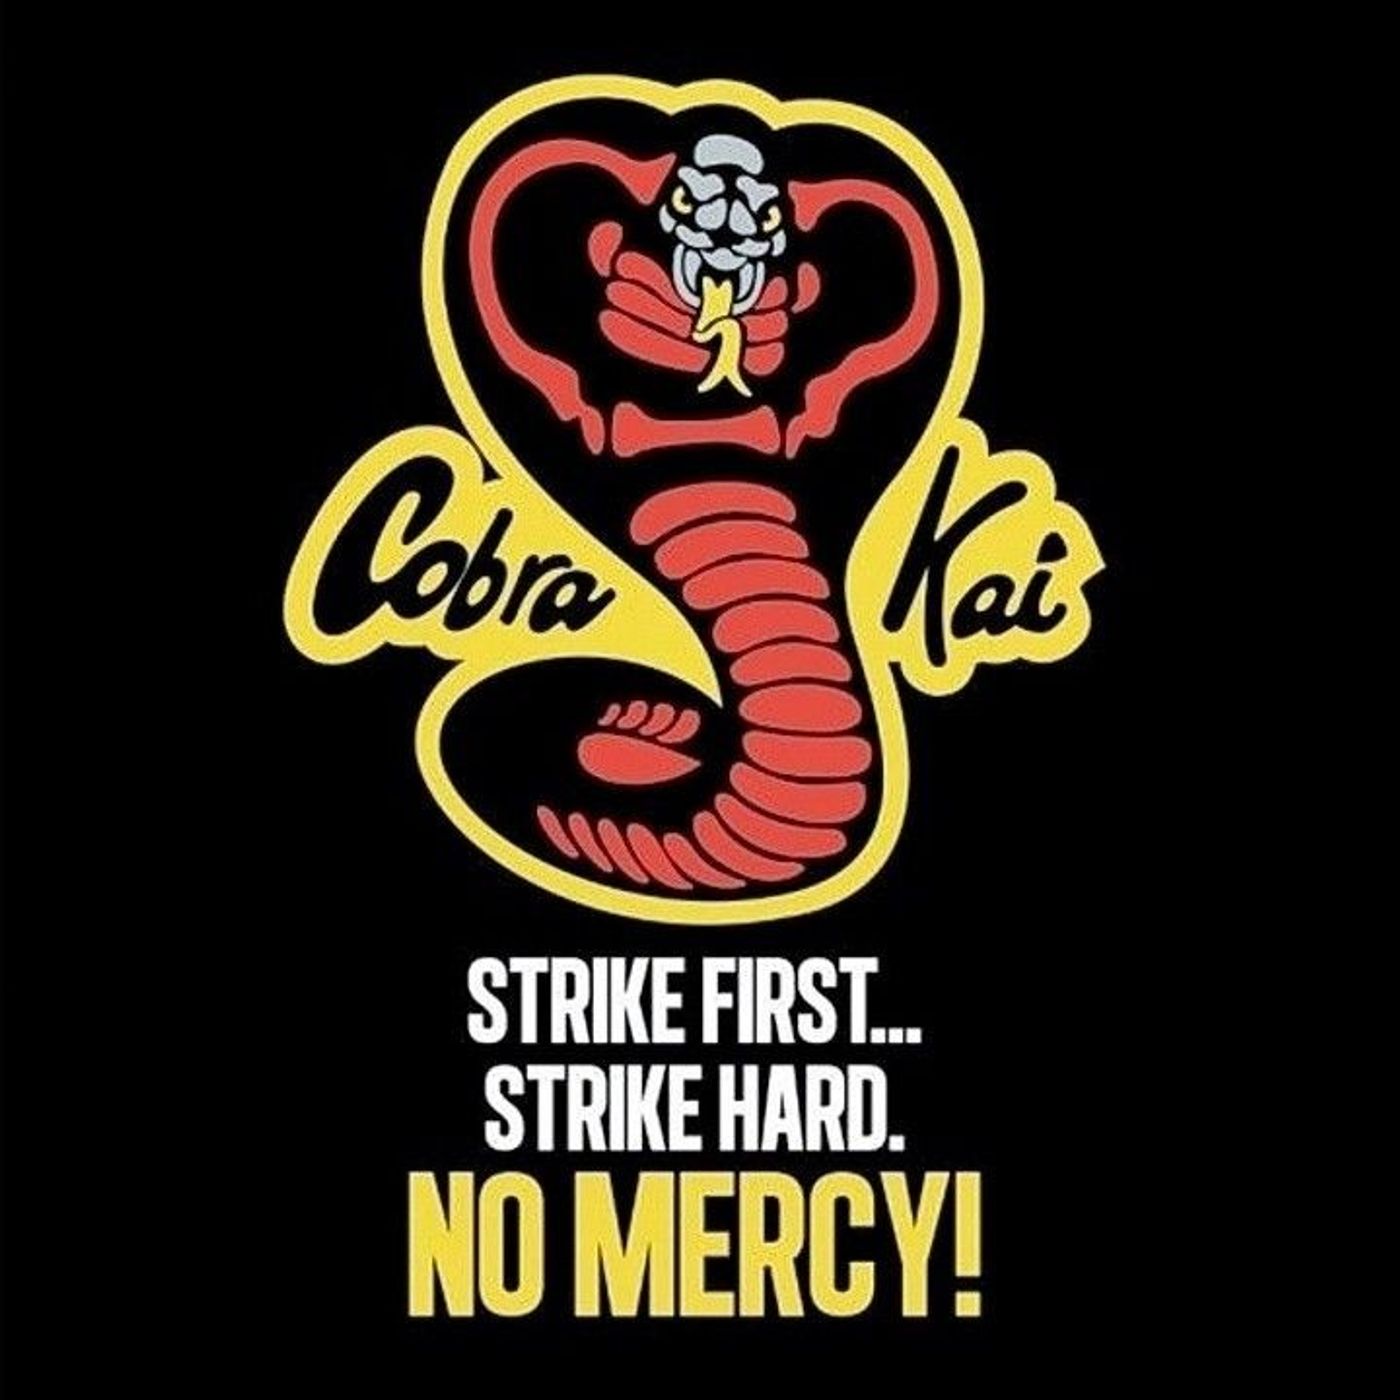 3 Lessons I had Learnt From The Cobra Kai Series